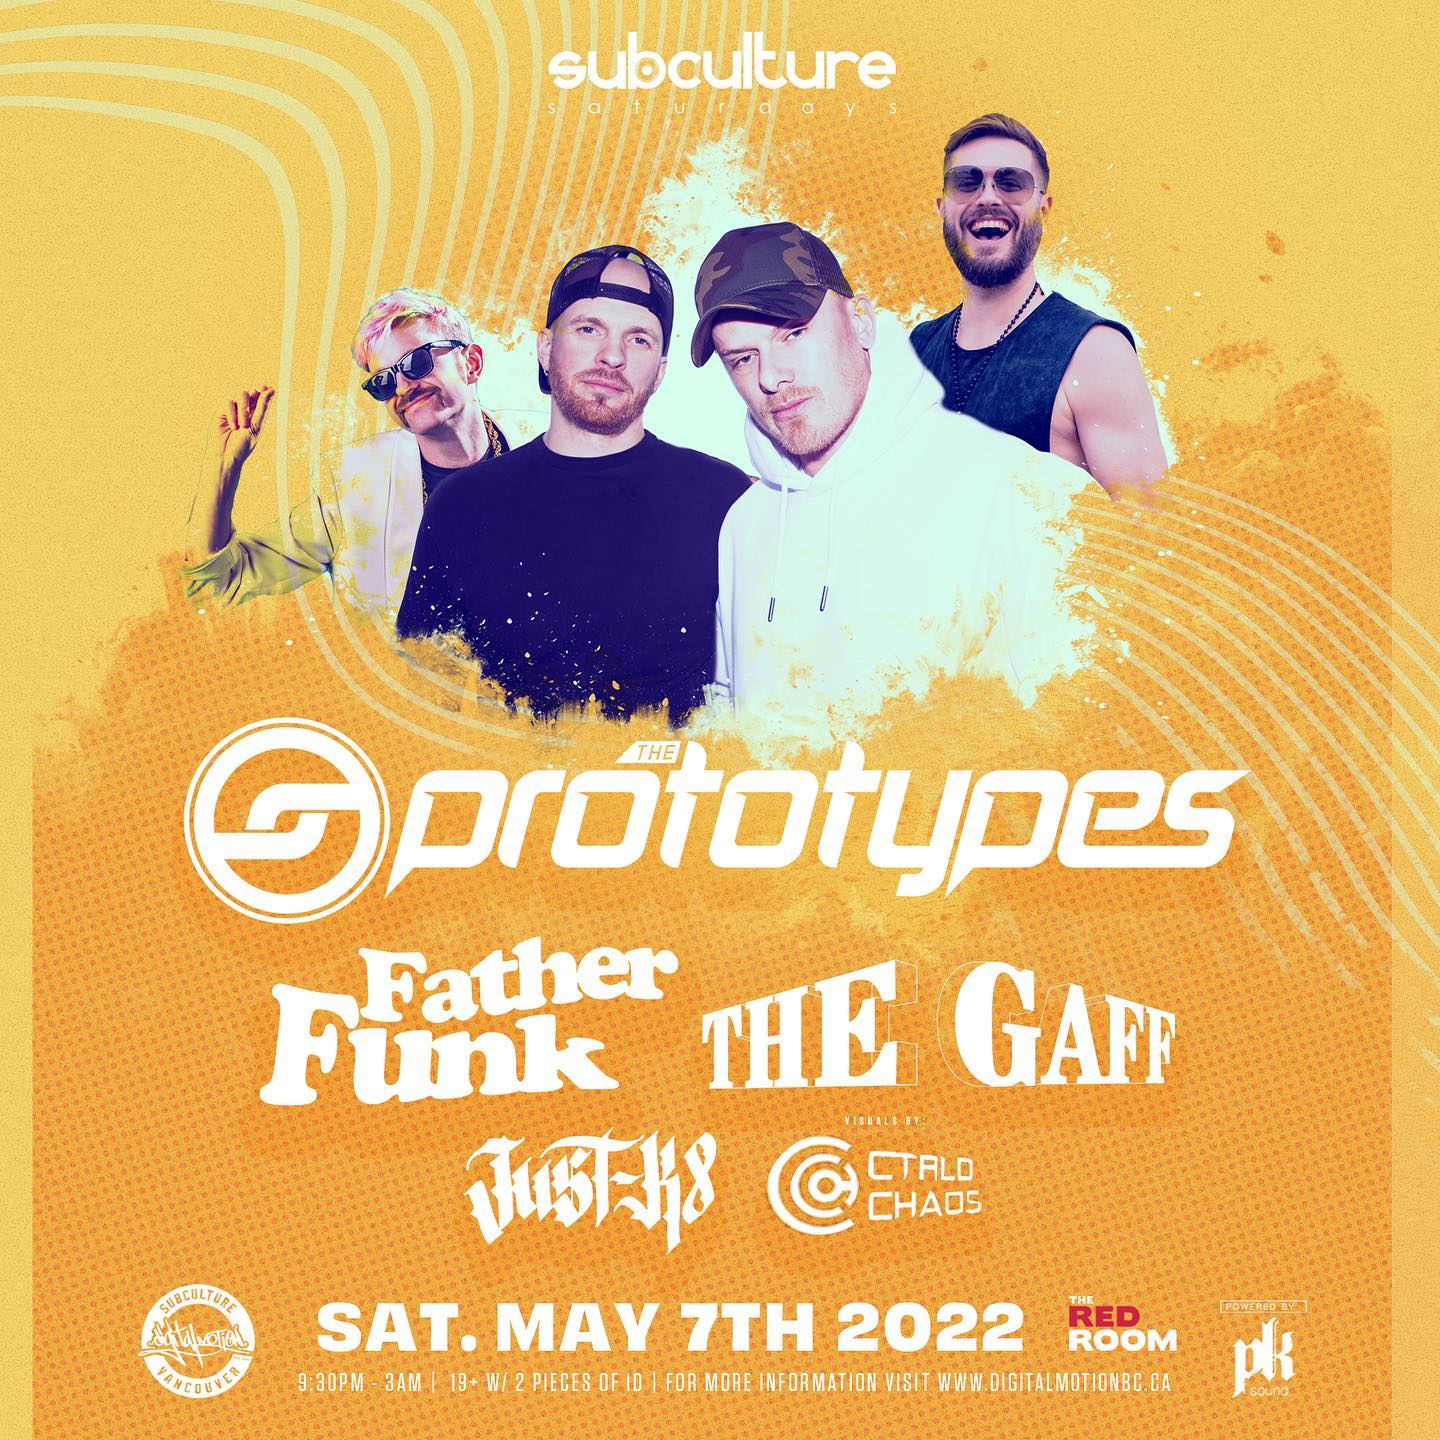 Coming up fast! You won't want to miss this amazing multi-genre night we have planned for every one in attendance next week. Catch @theprototypes @fatherfunk @thegaff @justk8music @ctrldchaos May 7th @redroomvancity 🔊💯🎶❤️